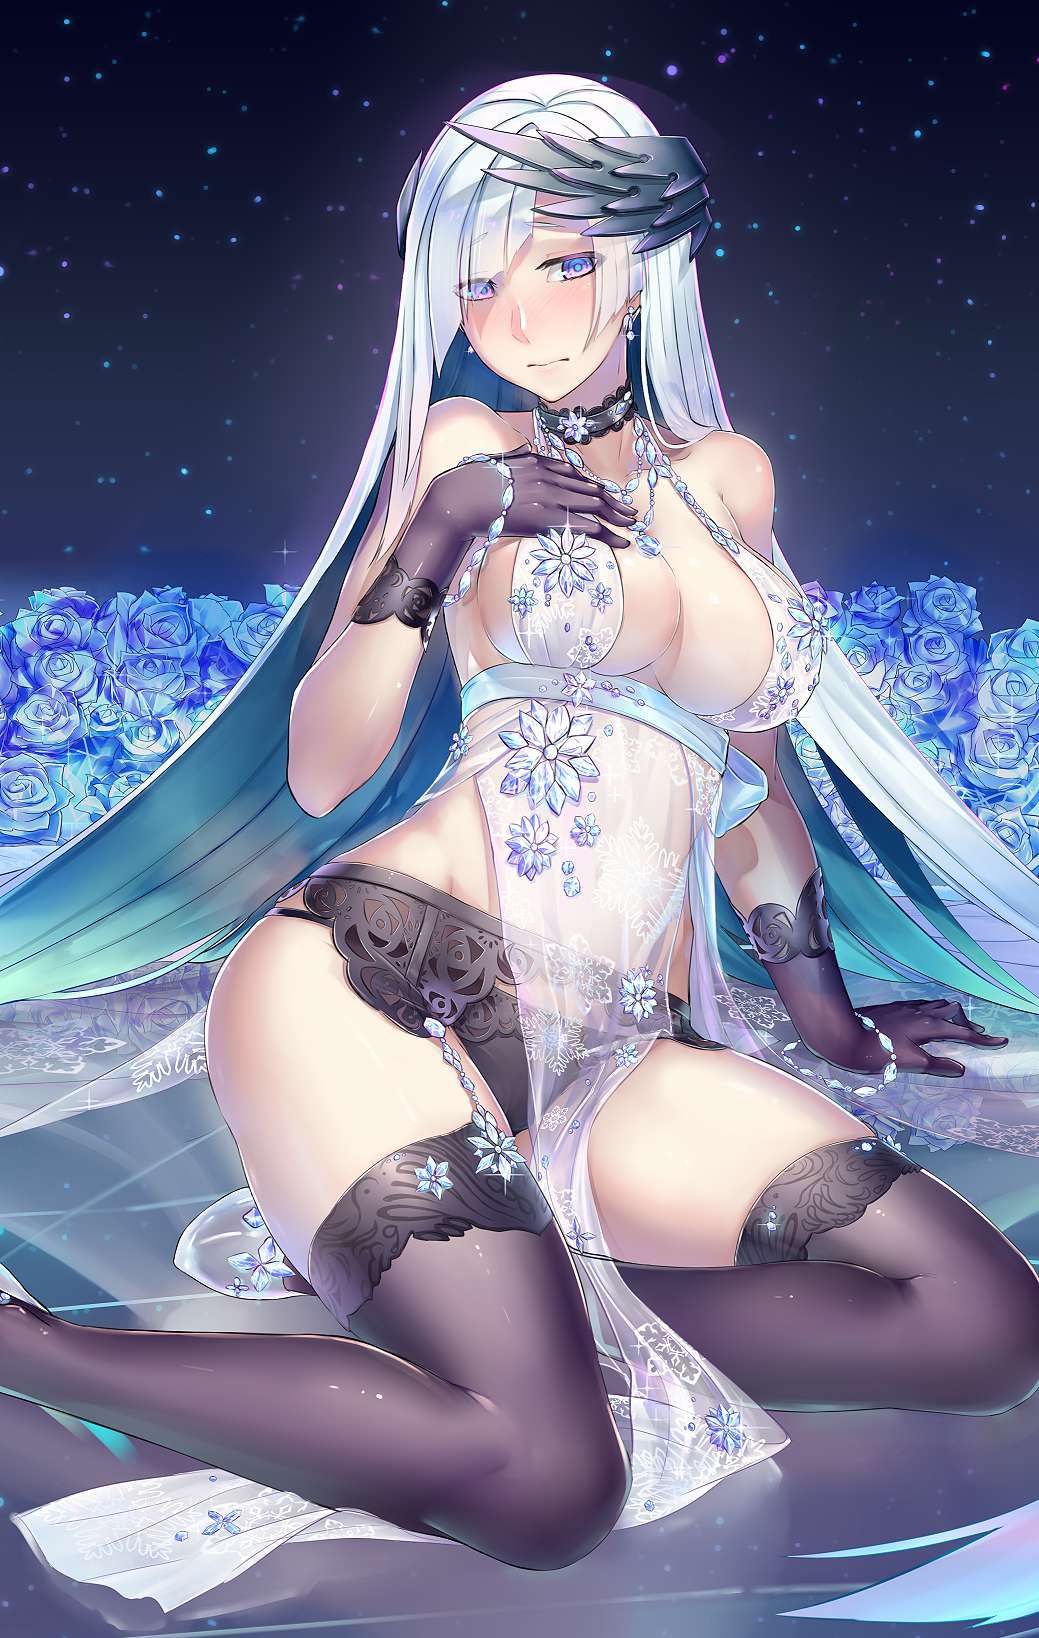 【Fate Grand Order】Secondary erotic image that can be made into Brunhilde's onaneta 2